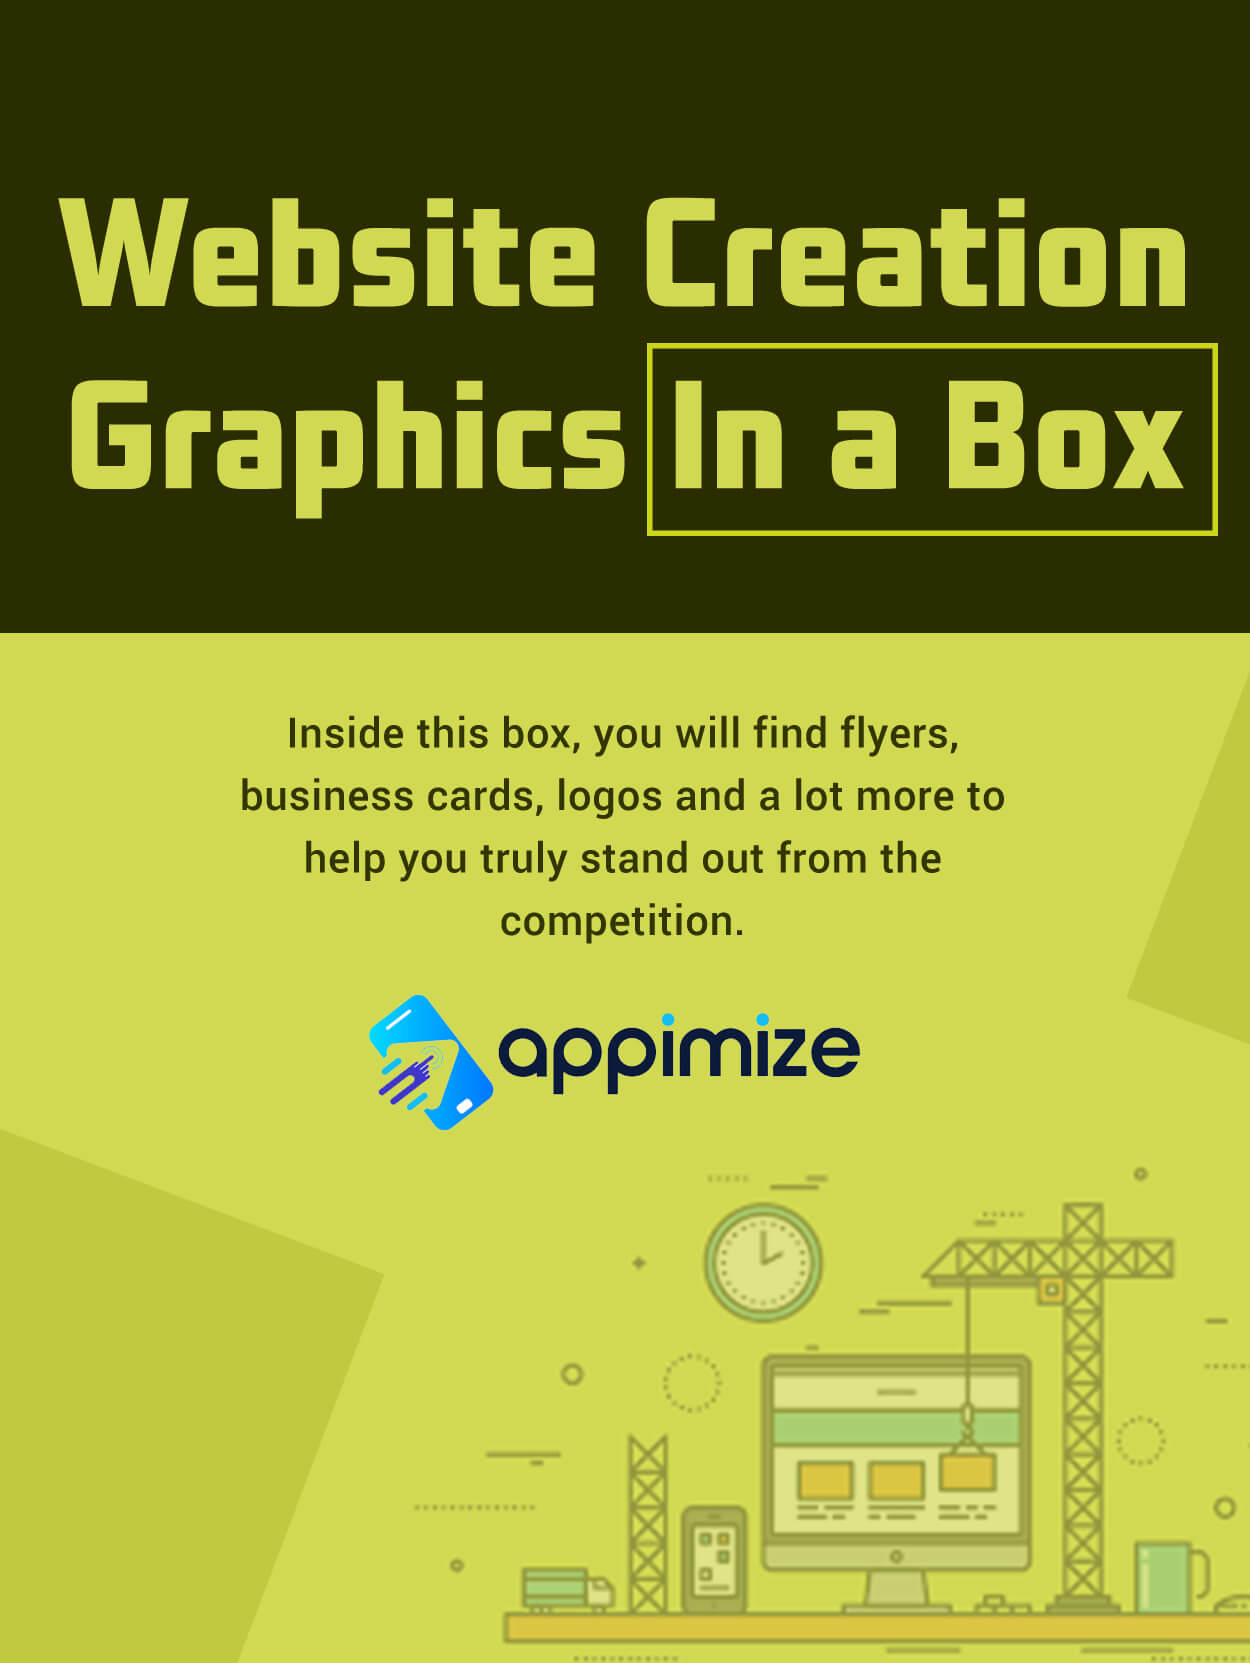 Appimize Review – Quickly Create Mobile Apps Using PWA Technology